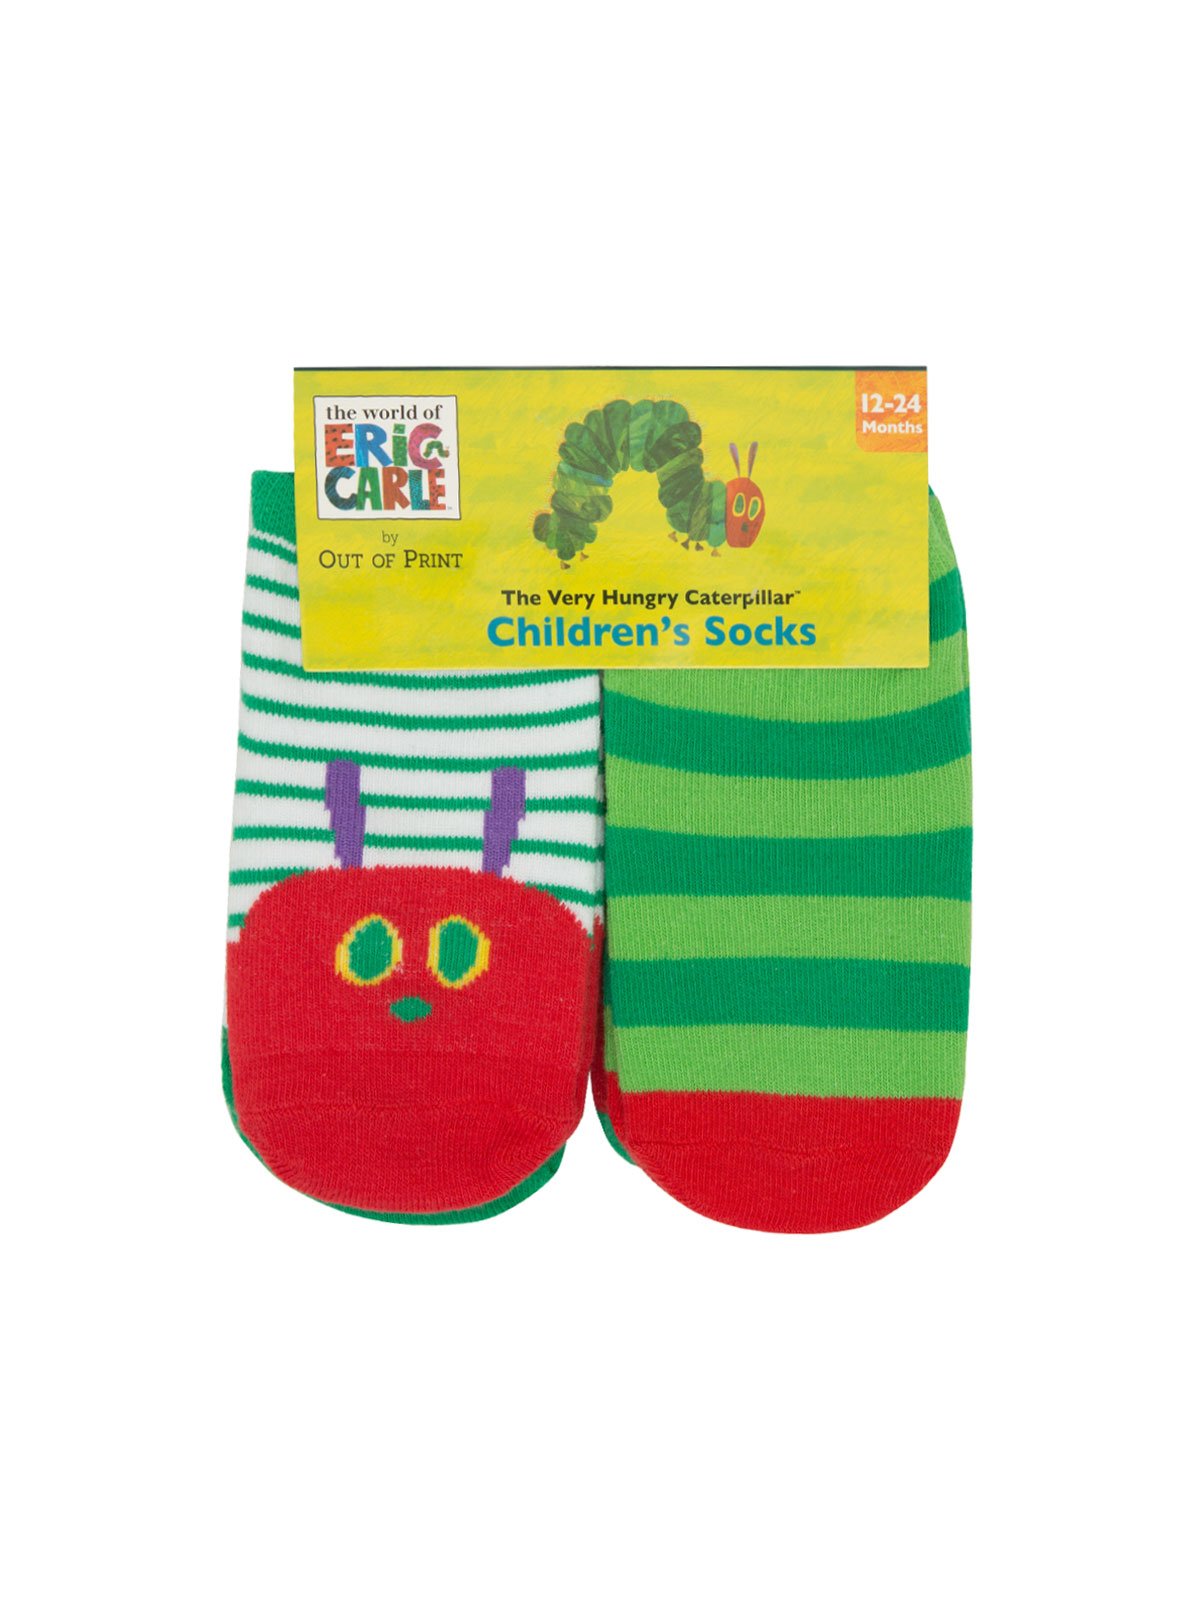 The Very Hungry Caterpillar socks from Out of Print in packaging showing 2 of the 4 pairs.